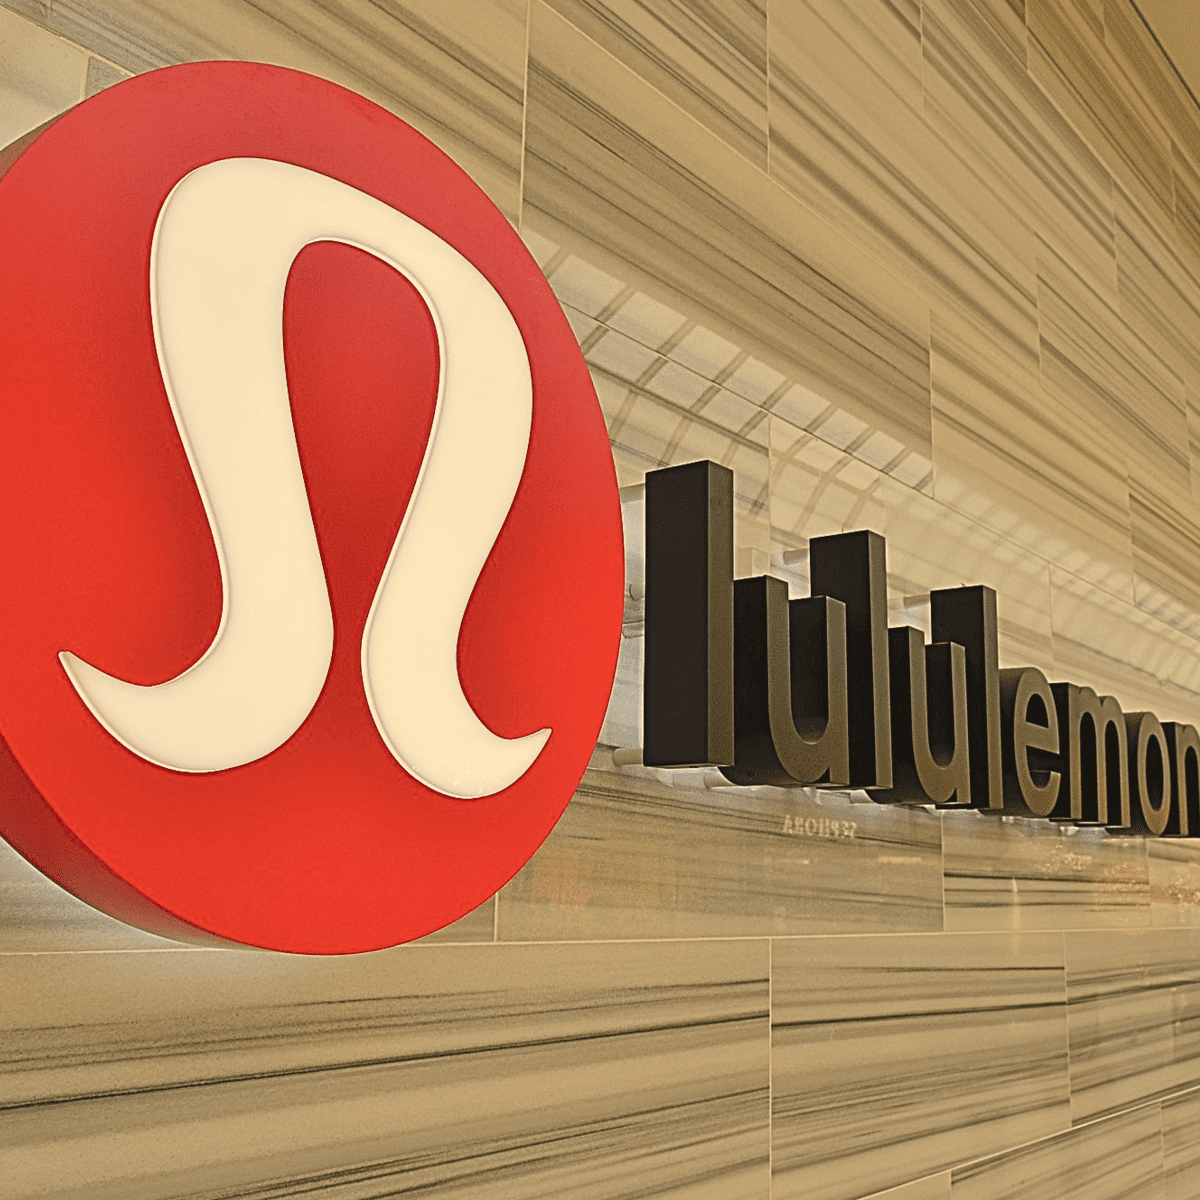 Killed Over a Pair of Yoga Pants? The Lululemon Murder - The CrimeWire